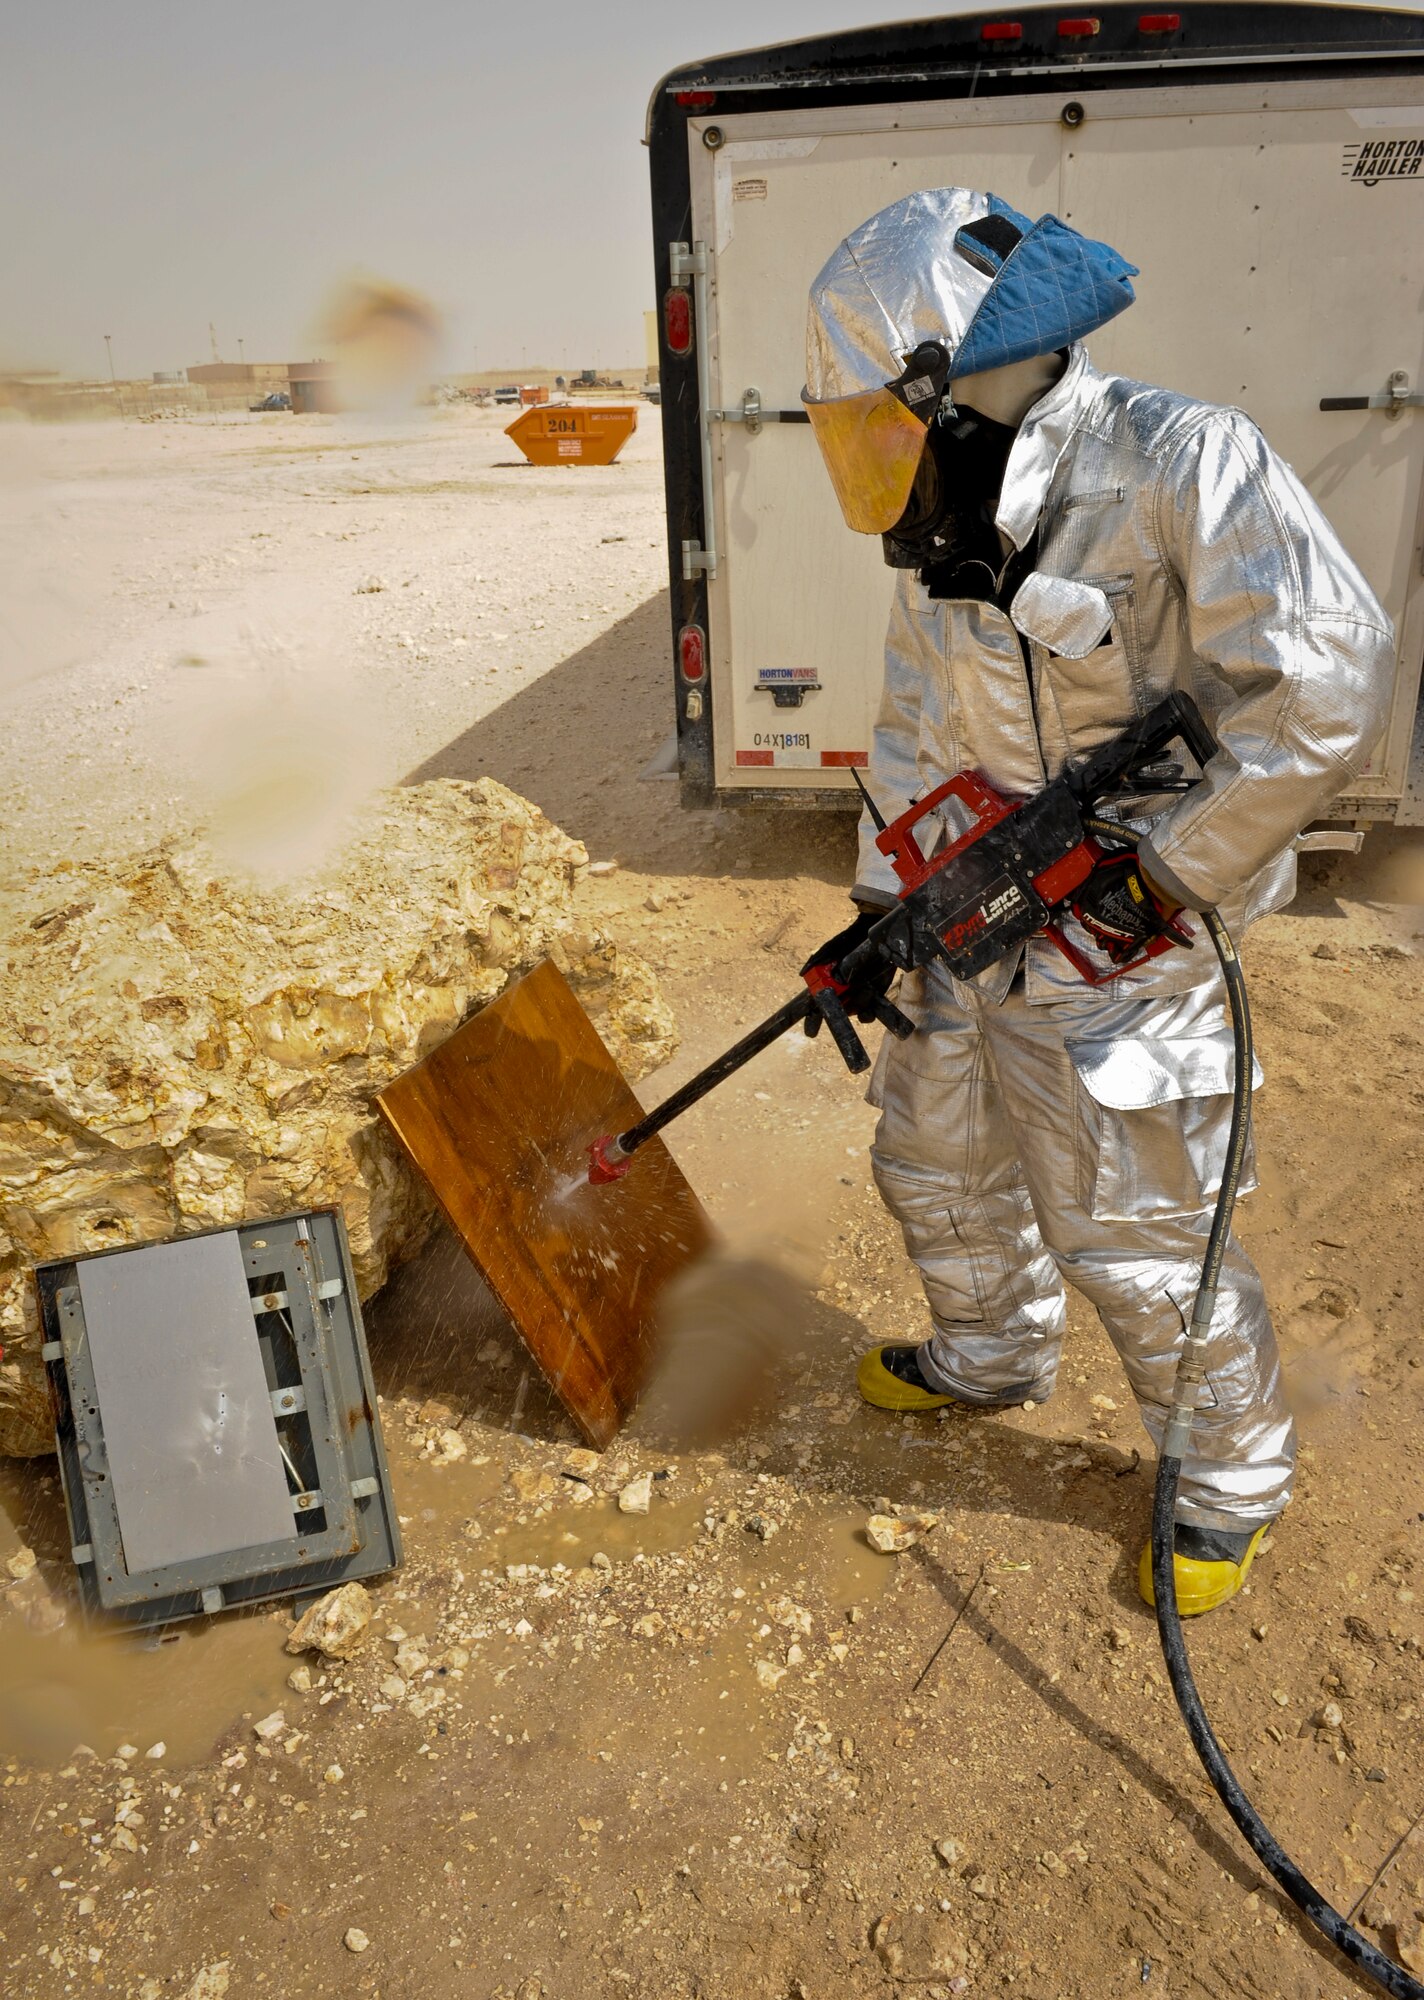 Airman 1st Class Taner Masters practices using a PyroLance during training, June 4, 2013, at the 379th Air Expeditionary Wing in Southwest Asia. This tool gives crews access to engine bays, cabins, cargo holds or anywhere else fire breaks out. Masters is a 379th Expeditionary Civil Engineer Squadron firefighter. (U.S. Air Force photo/Senior Airman Benjamin Stratton)